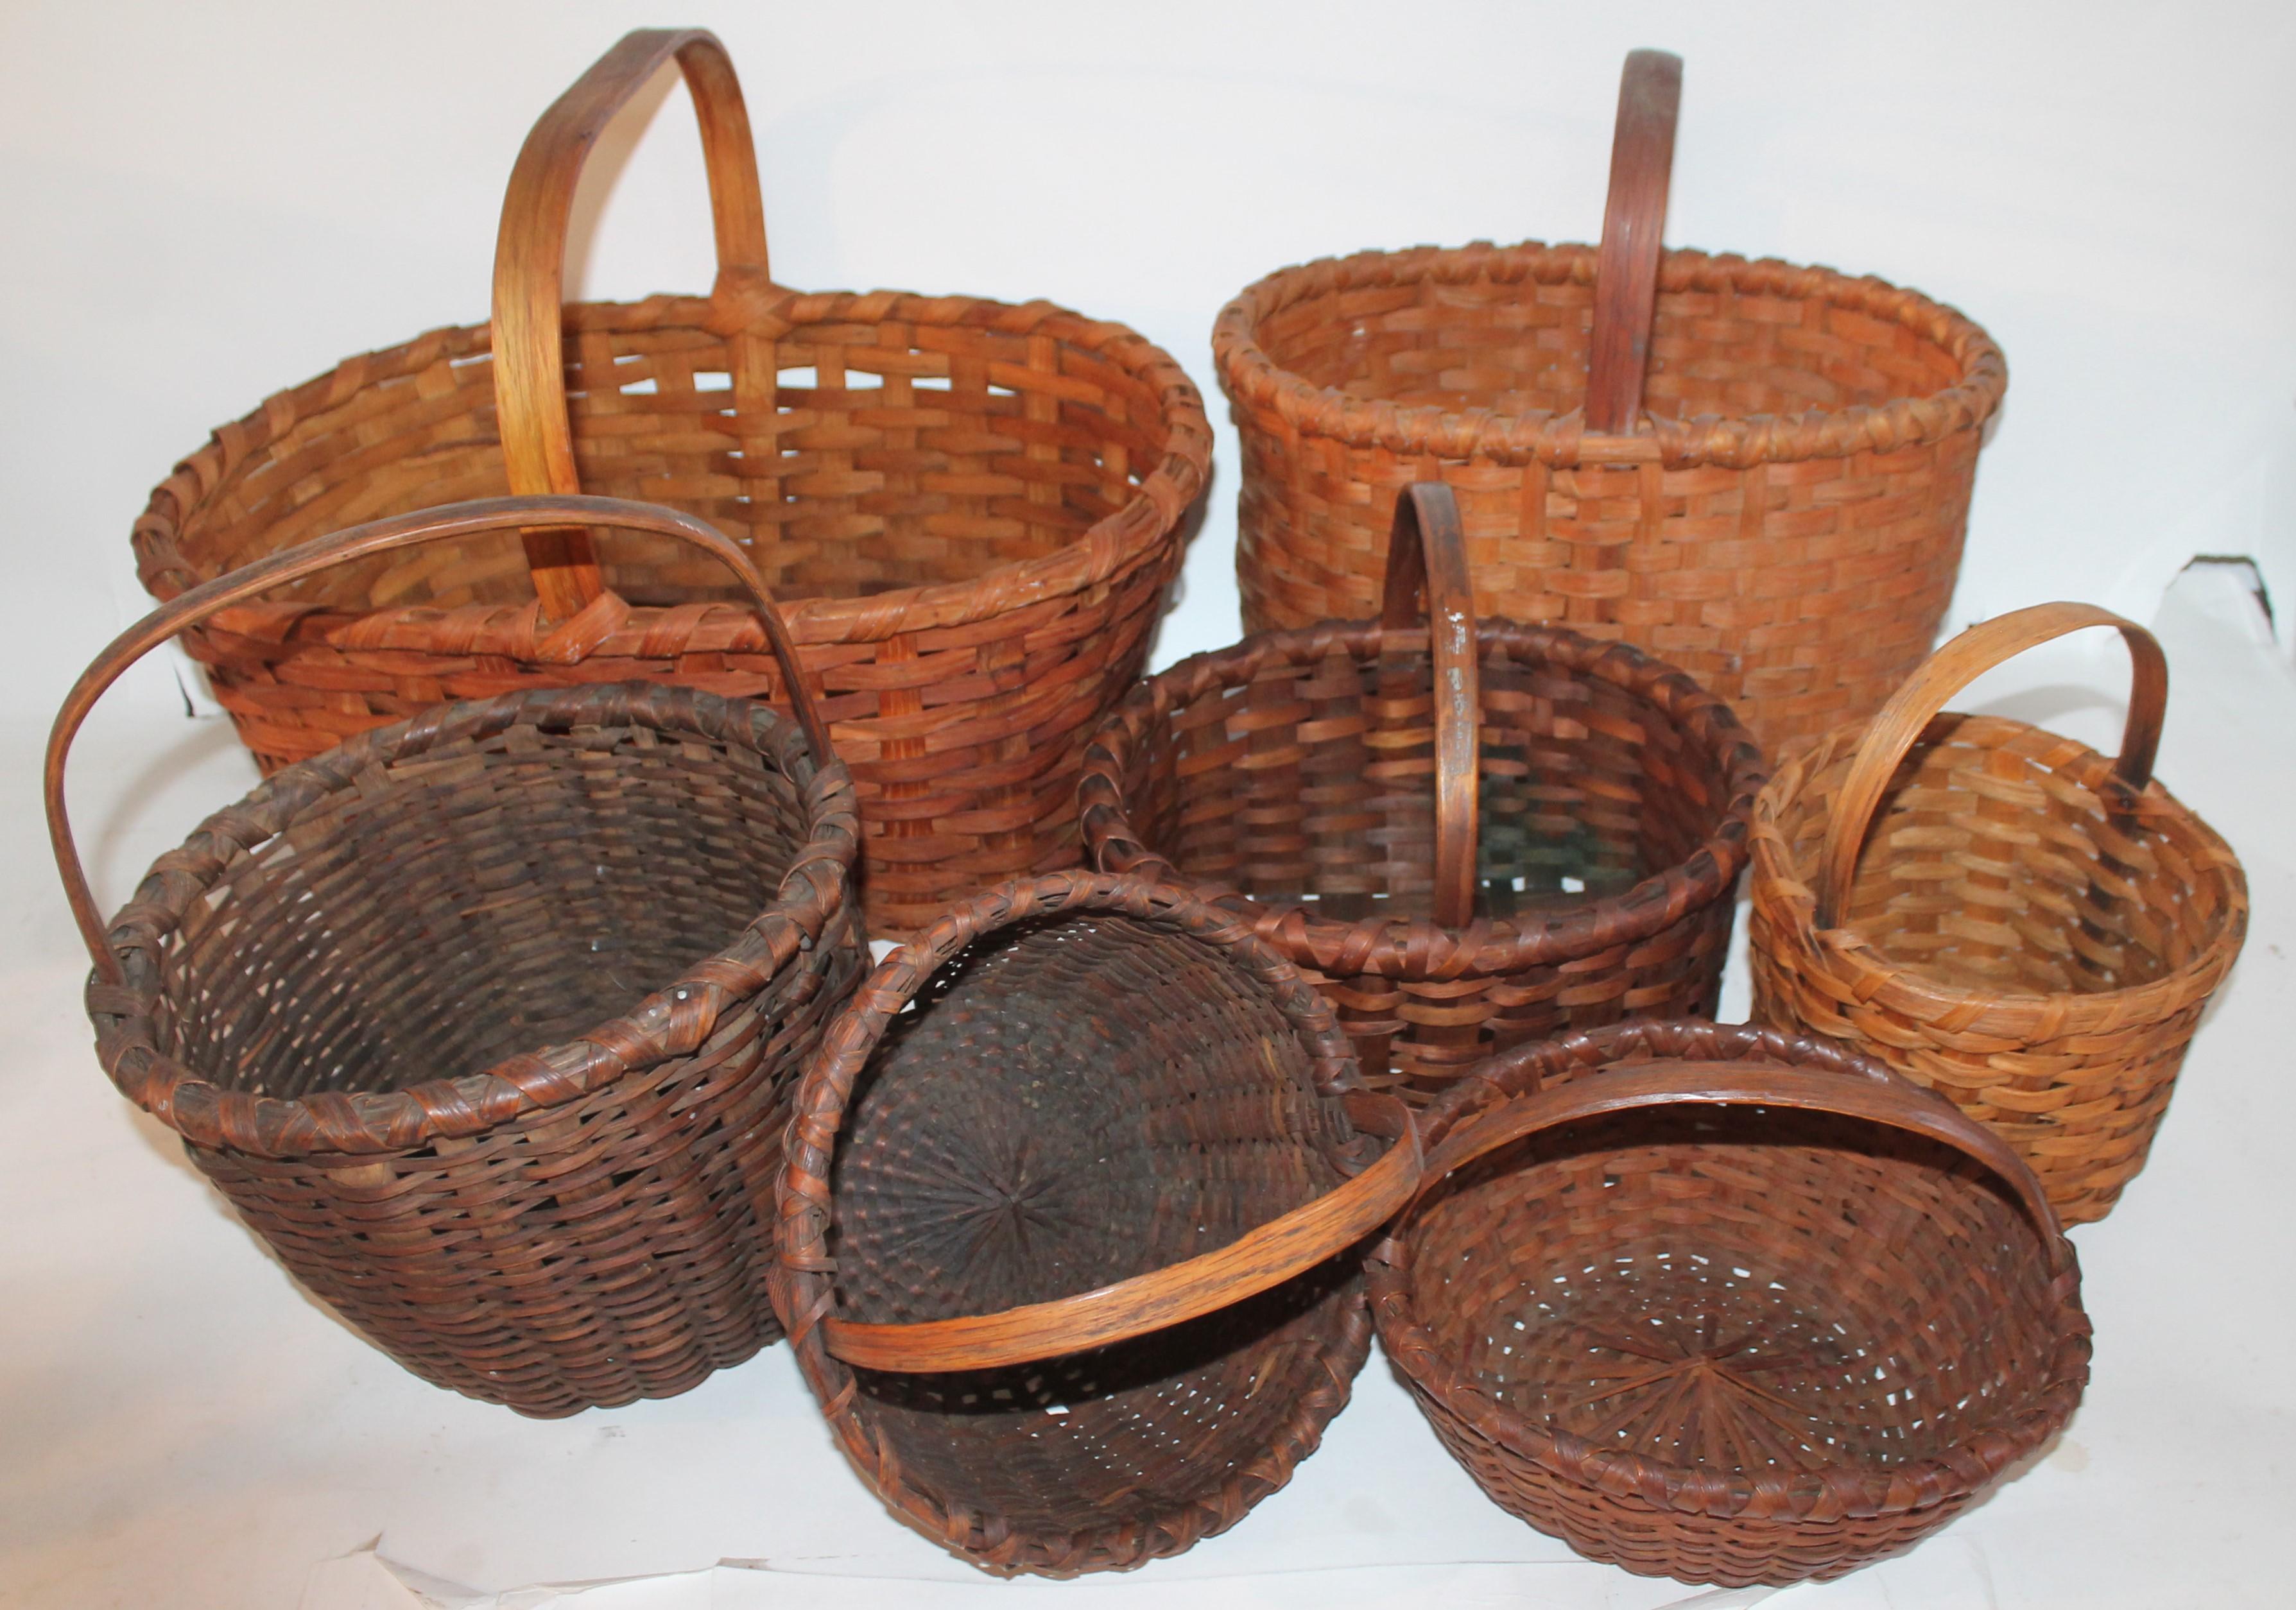 Baskets are measured in order, starting from second photo/image onward. These baskets are all in good condition. Some may have small breaks on base but very little.

Measures: 15 x 16 x 20
10 x 11 x 14
11.5 x 10.5 x 10.5
15.5 x 10 x 15.5
9.5 x